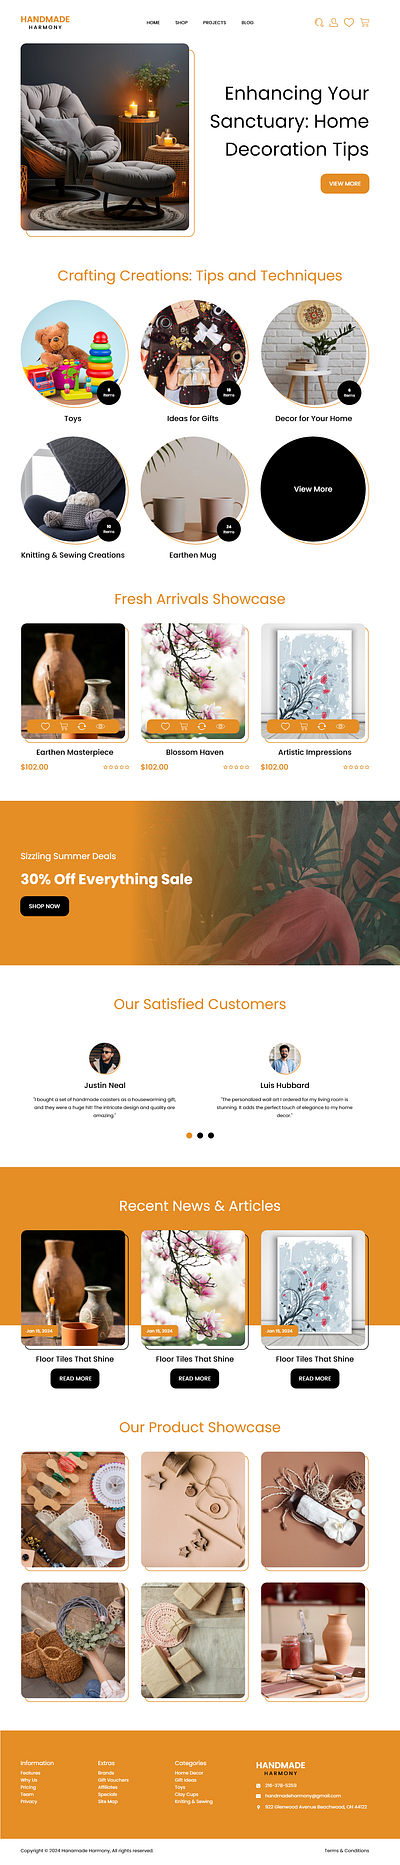 Handmade Products eCommerce Website Design ecommerce landing page ecommerce website ecommerce website design handmade products ecommerce handmade products website